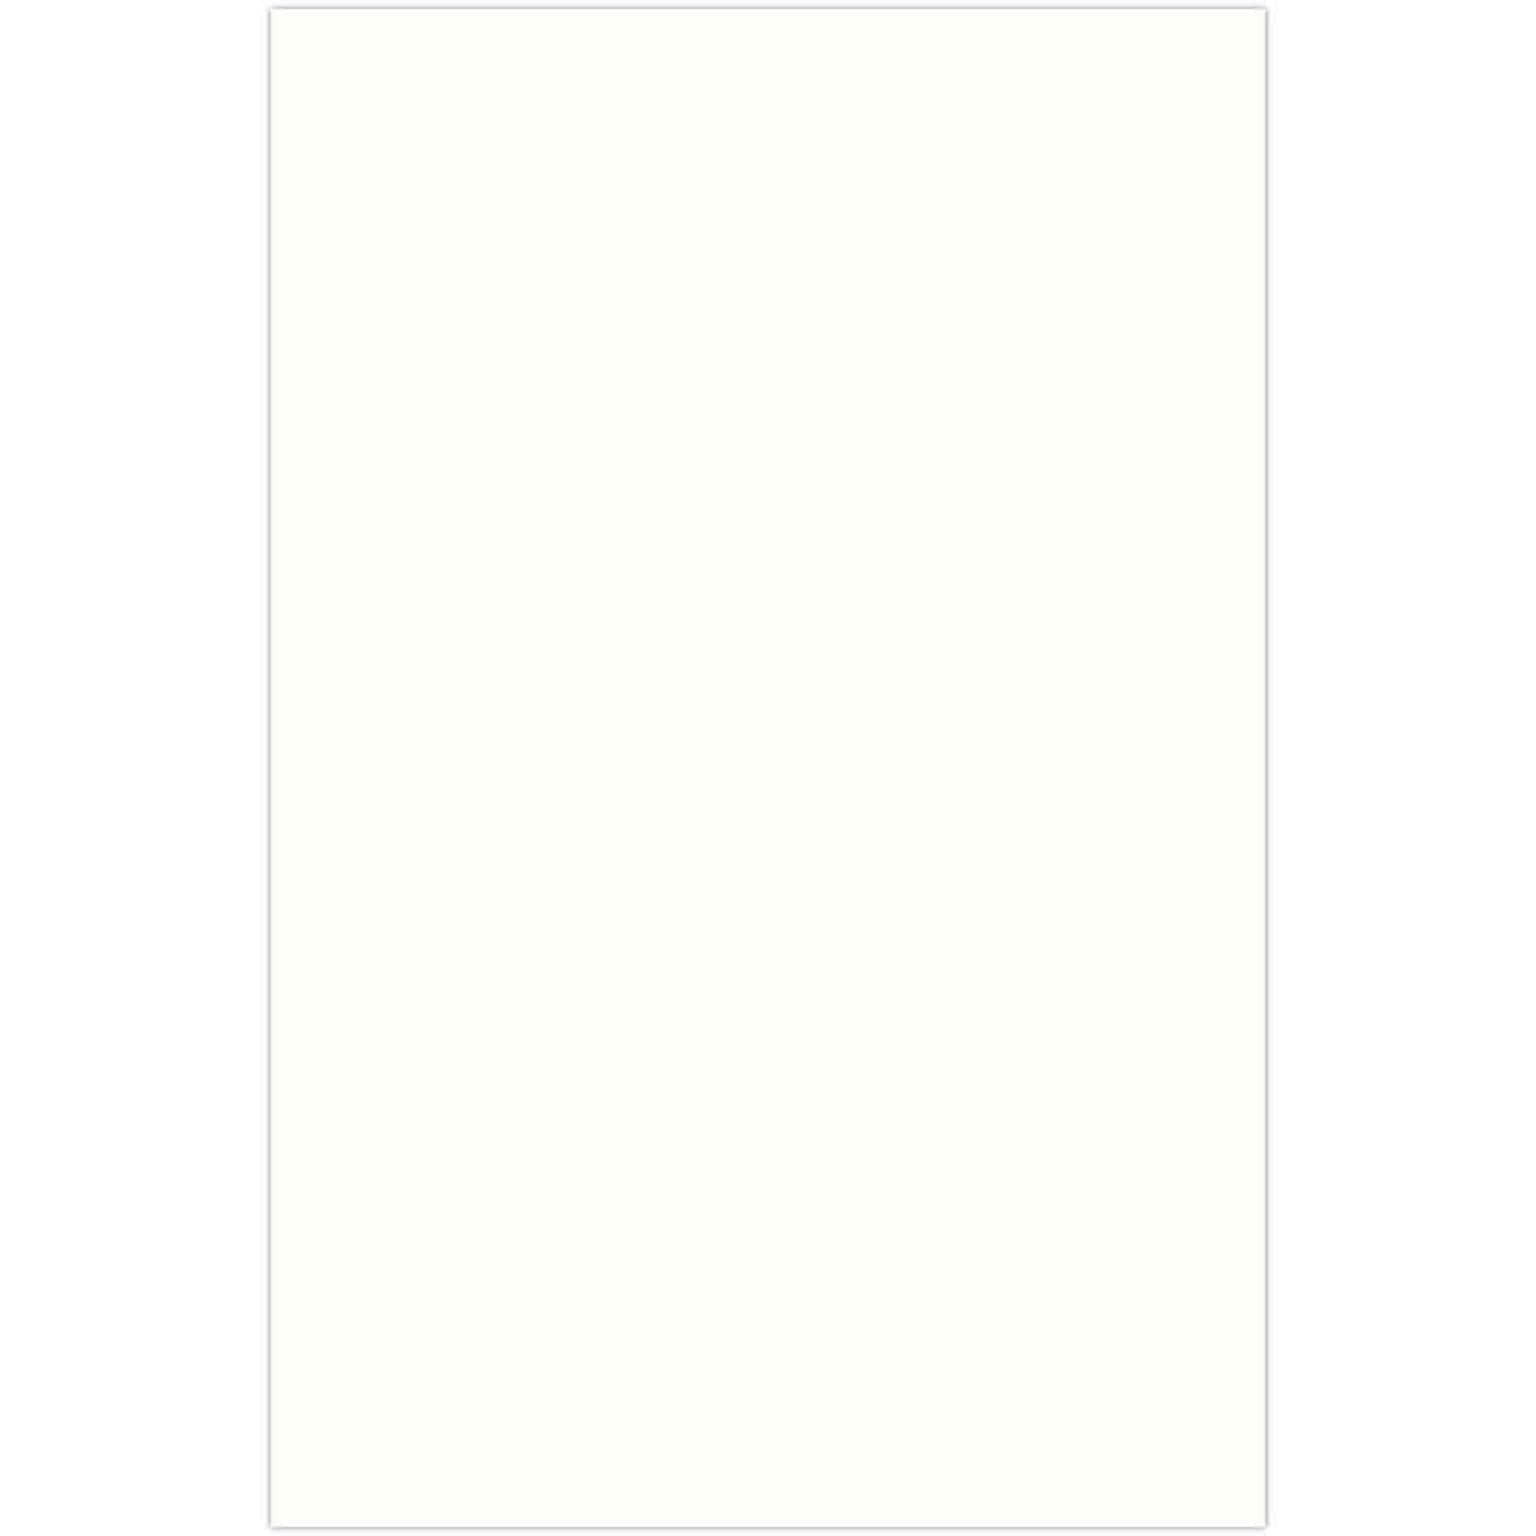 JAM Paper® 11 x 17 Tabloid Size Cardstock, Strathmore Natural White Wove 88lb, 50/Pack (17430341)